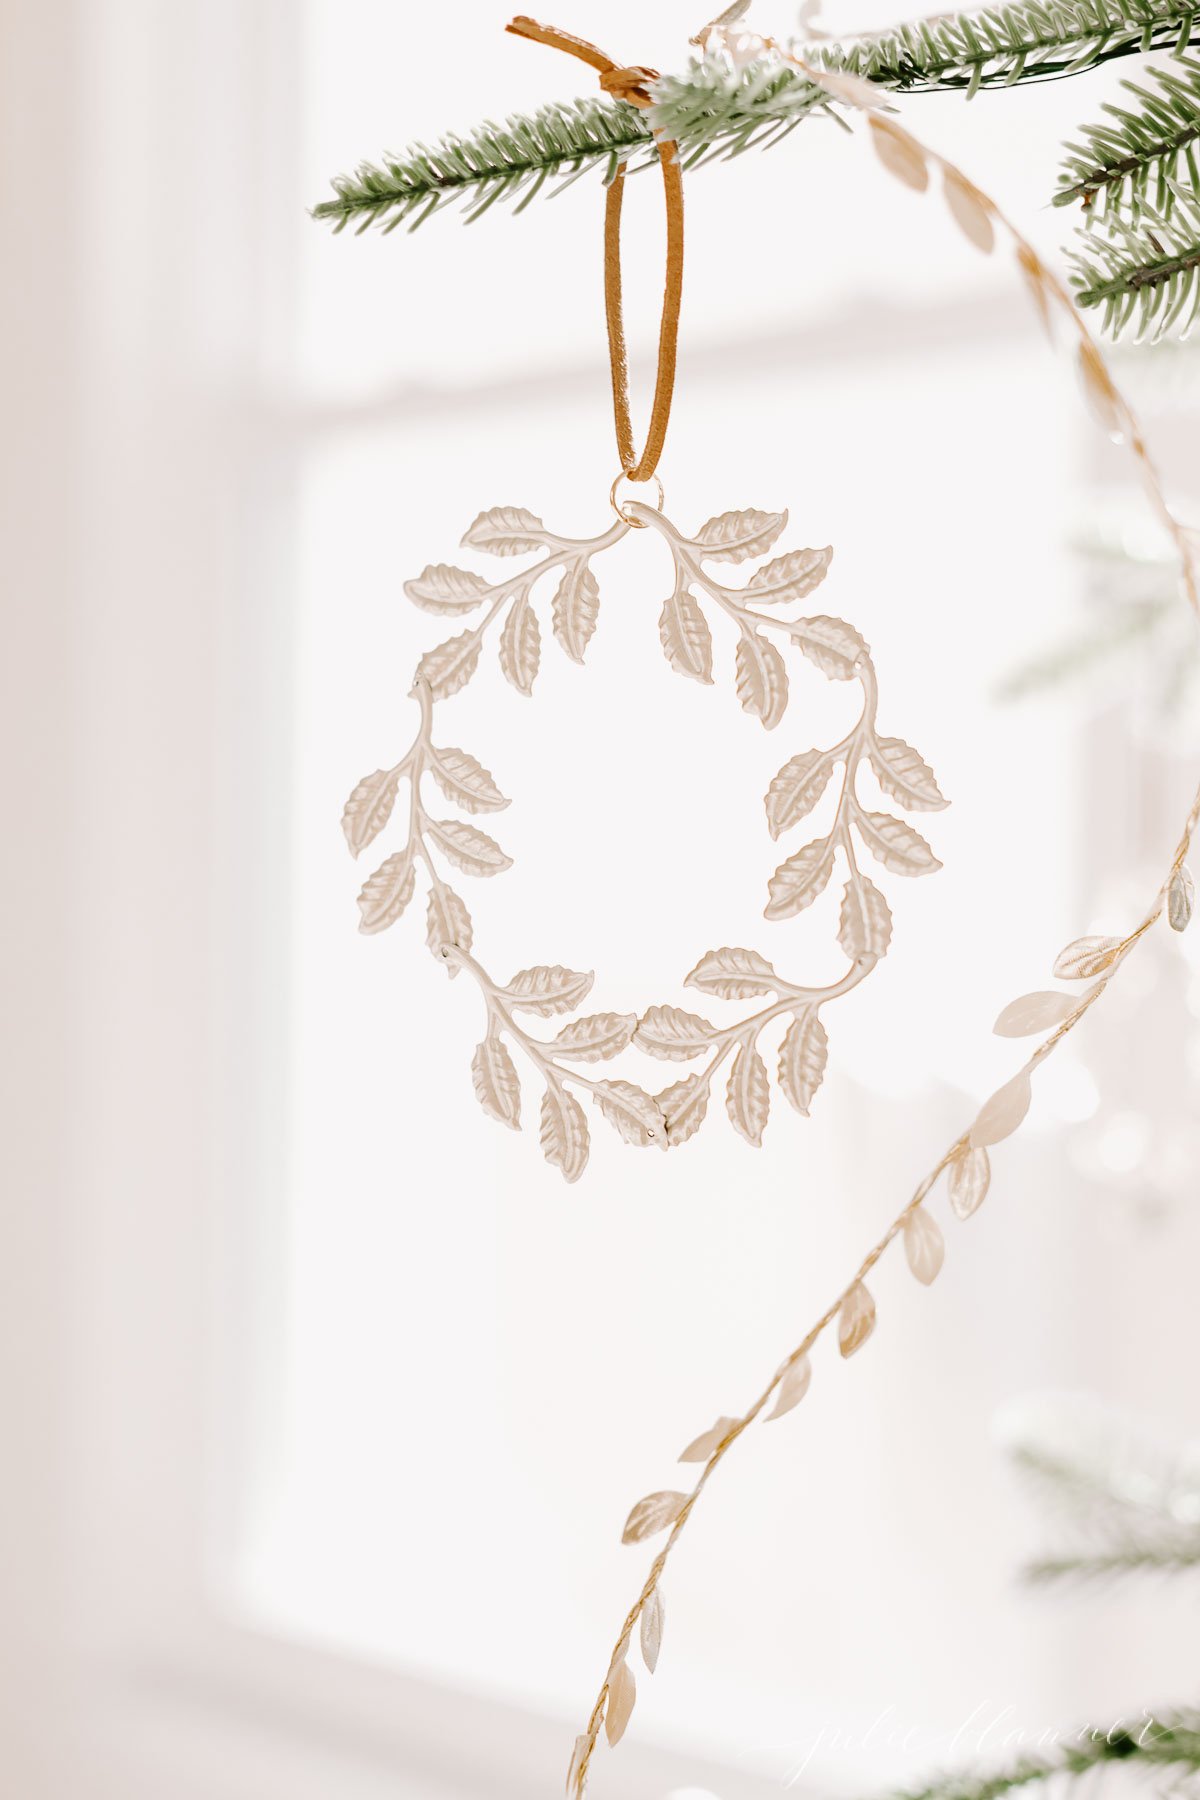 A laurel wreath ornament hanging from a tree.